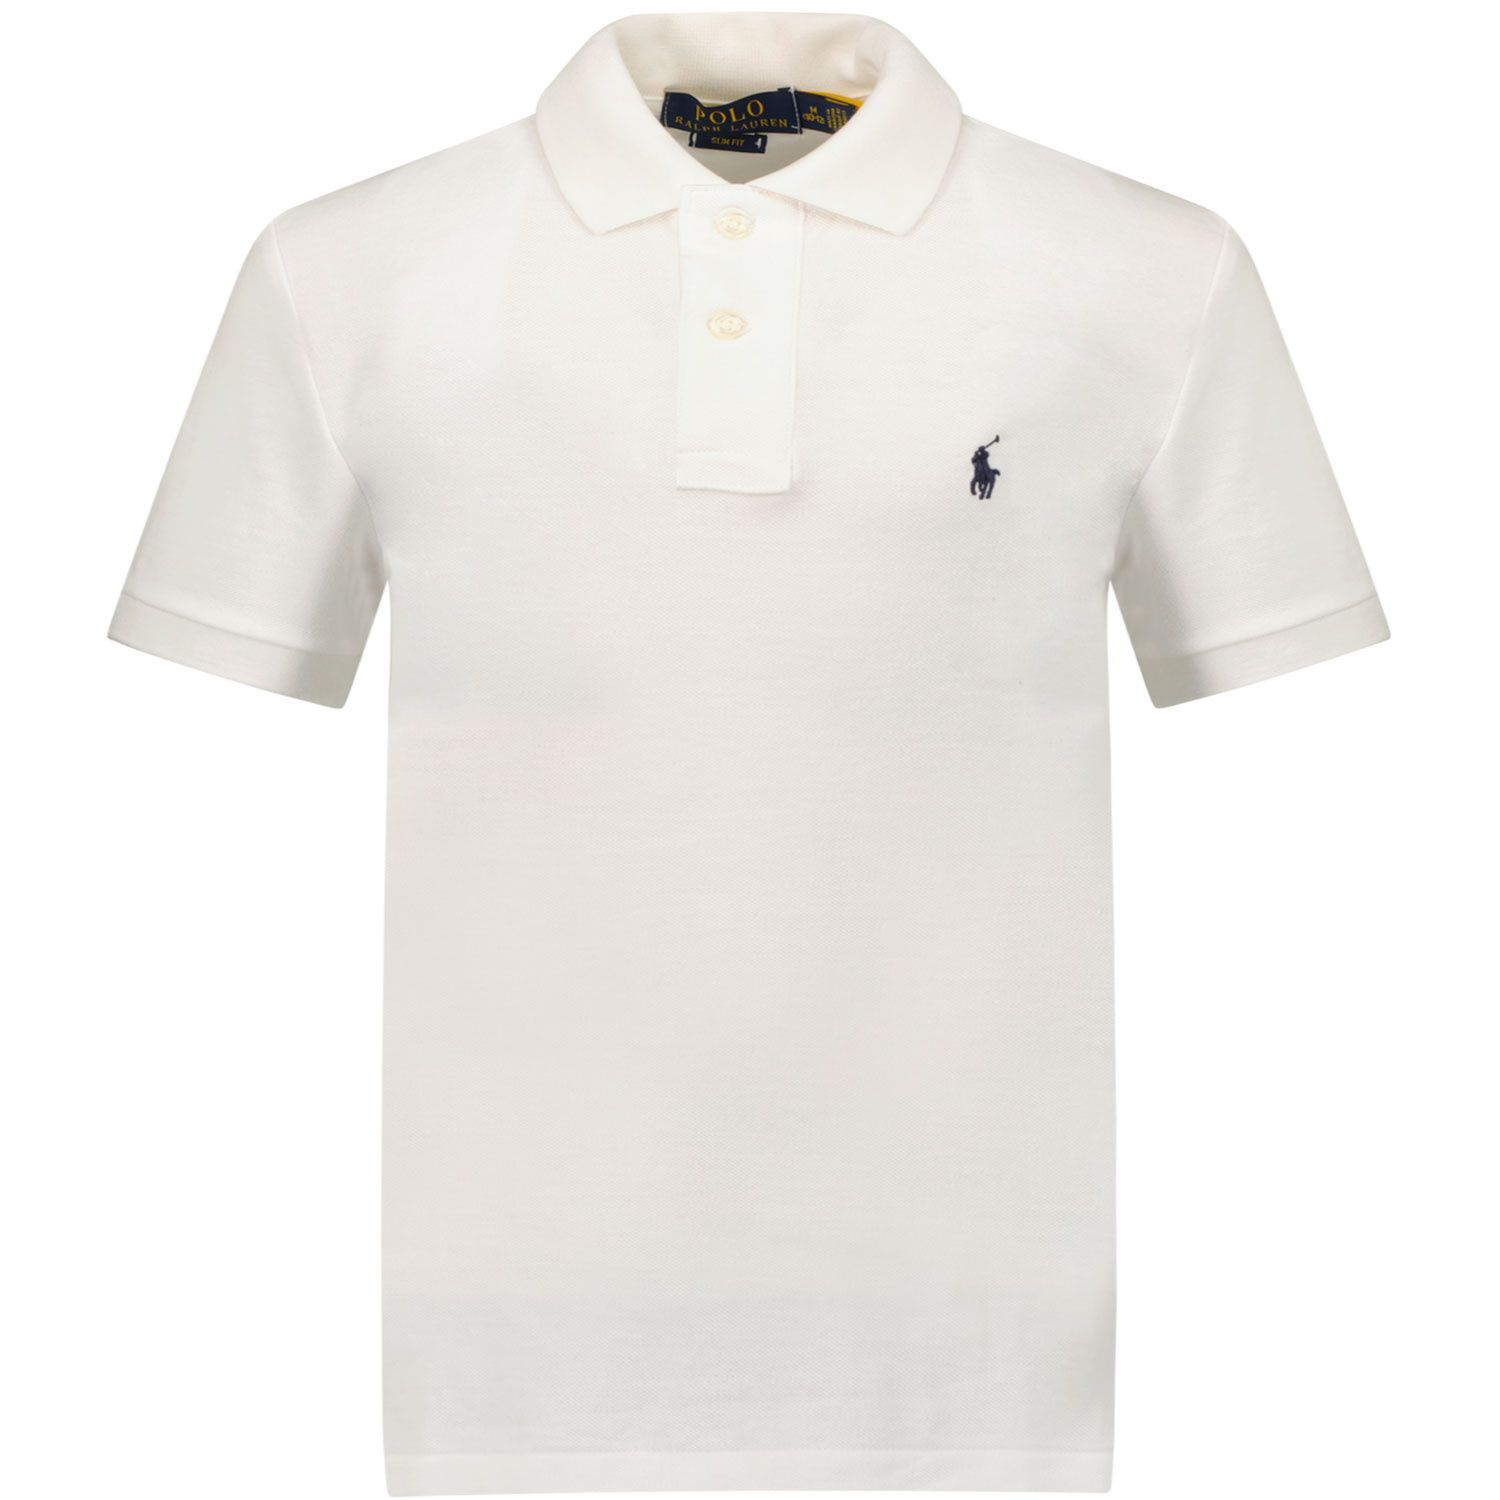 Picture of Ralph Lauren 547926 kids polo shirt white